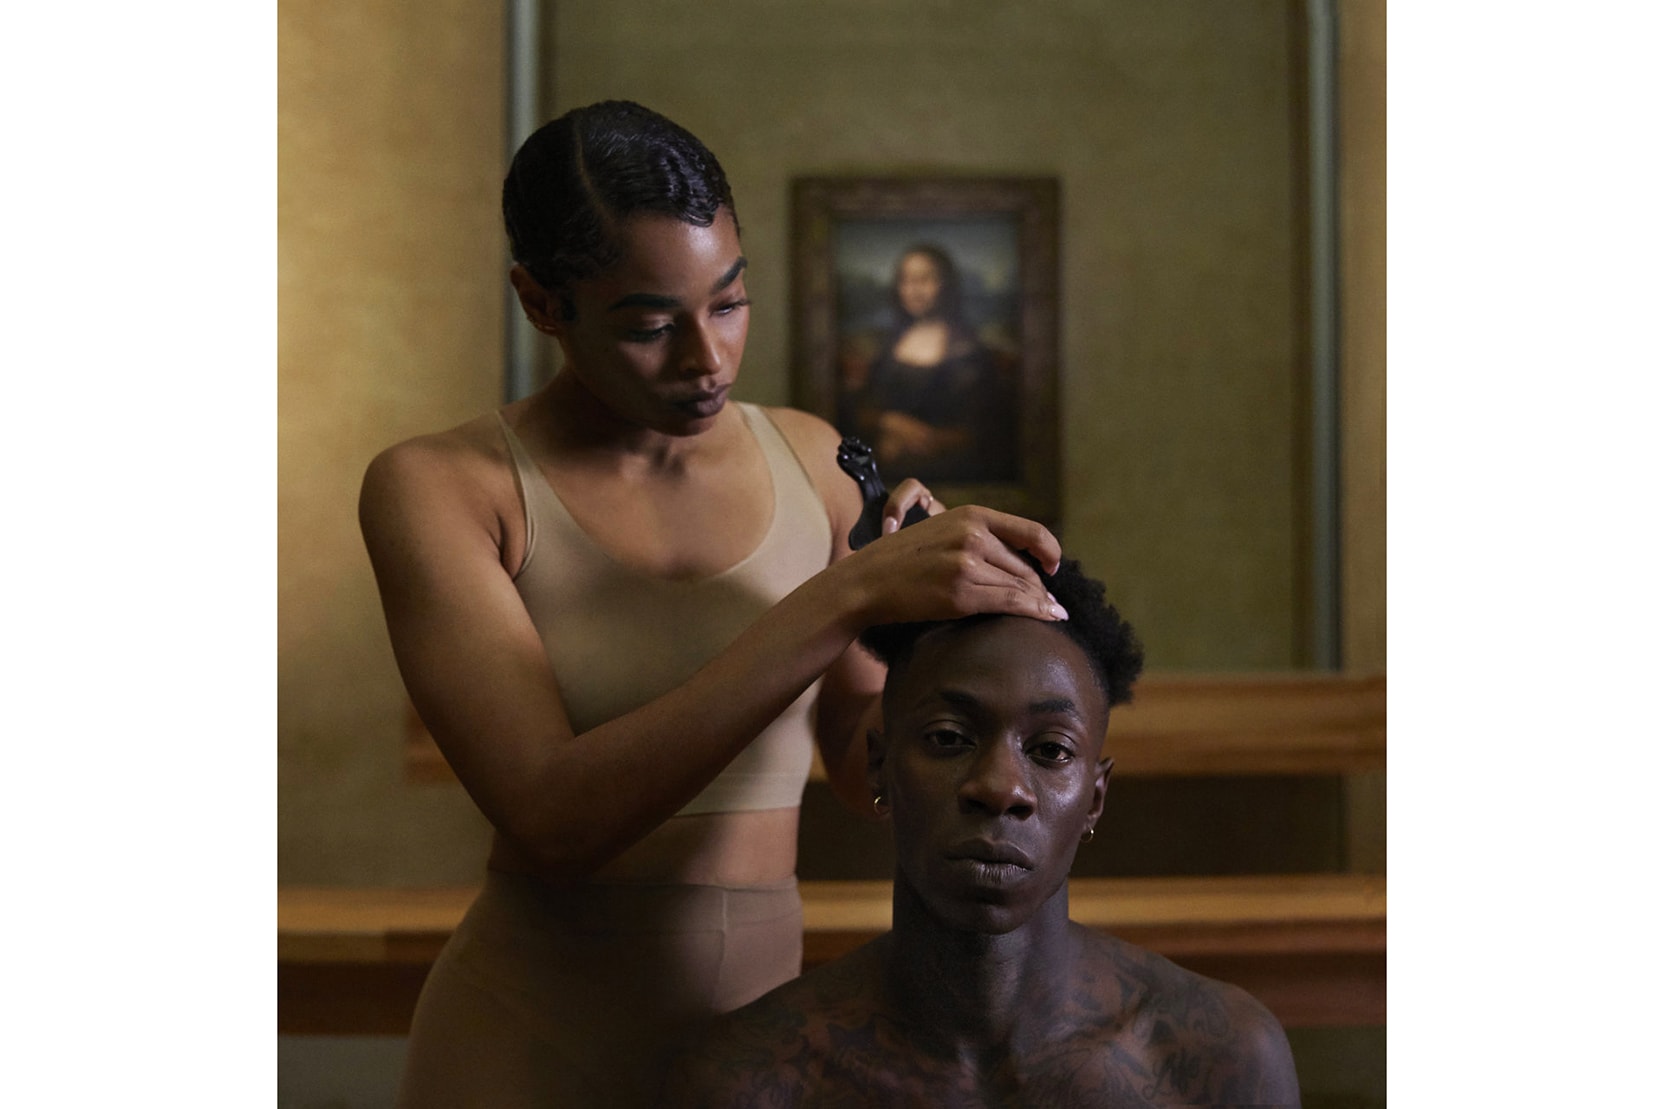 Beyonce Jay-Z The Carters 'Everything is Love' Album Stream Listen Free Now Spotify Apple Music Premium Members Listen Download